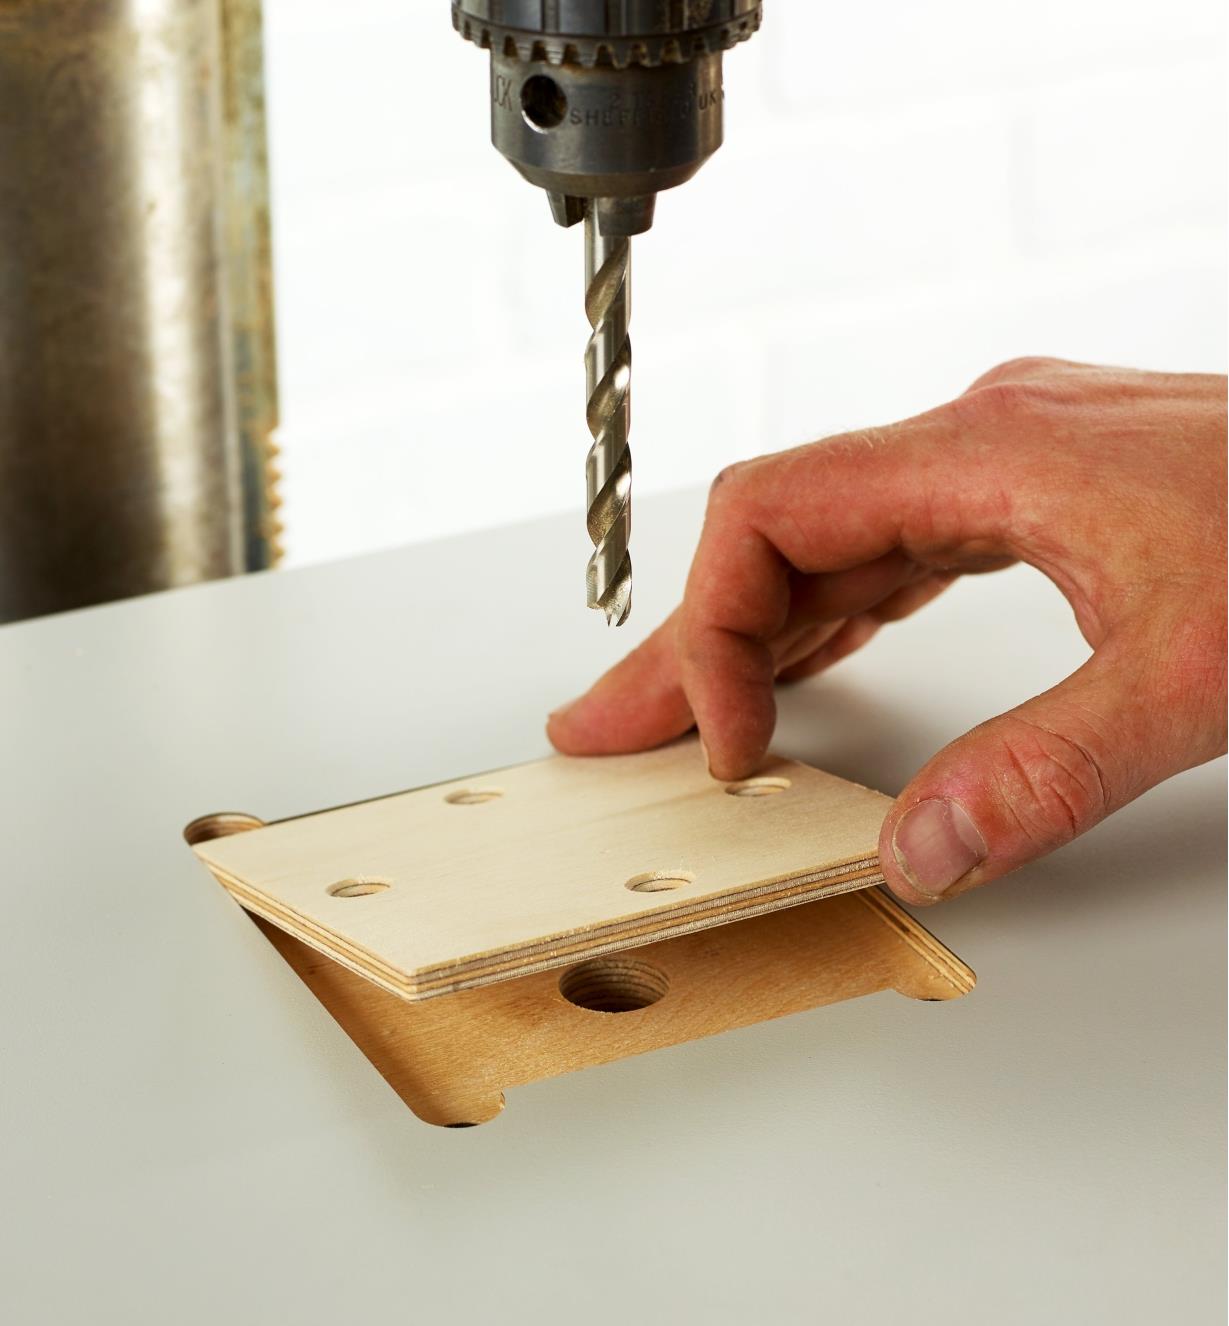 Setting the removable wooden insert into the table top to support through-drilling